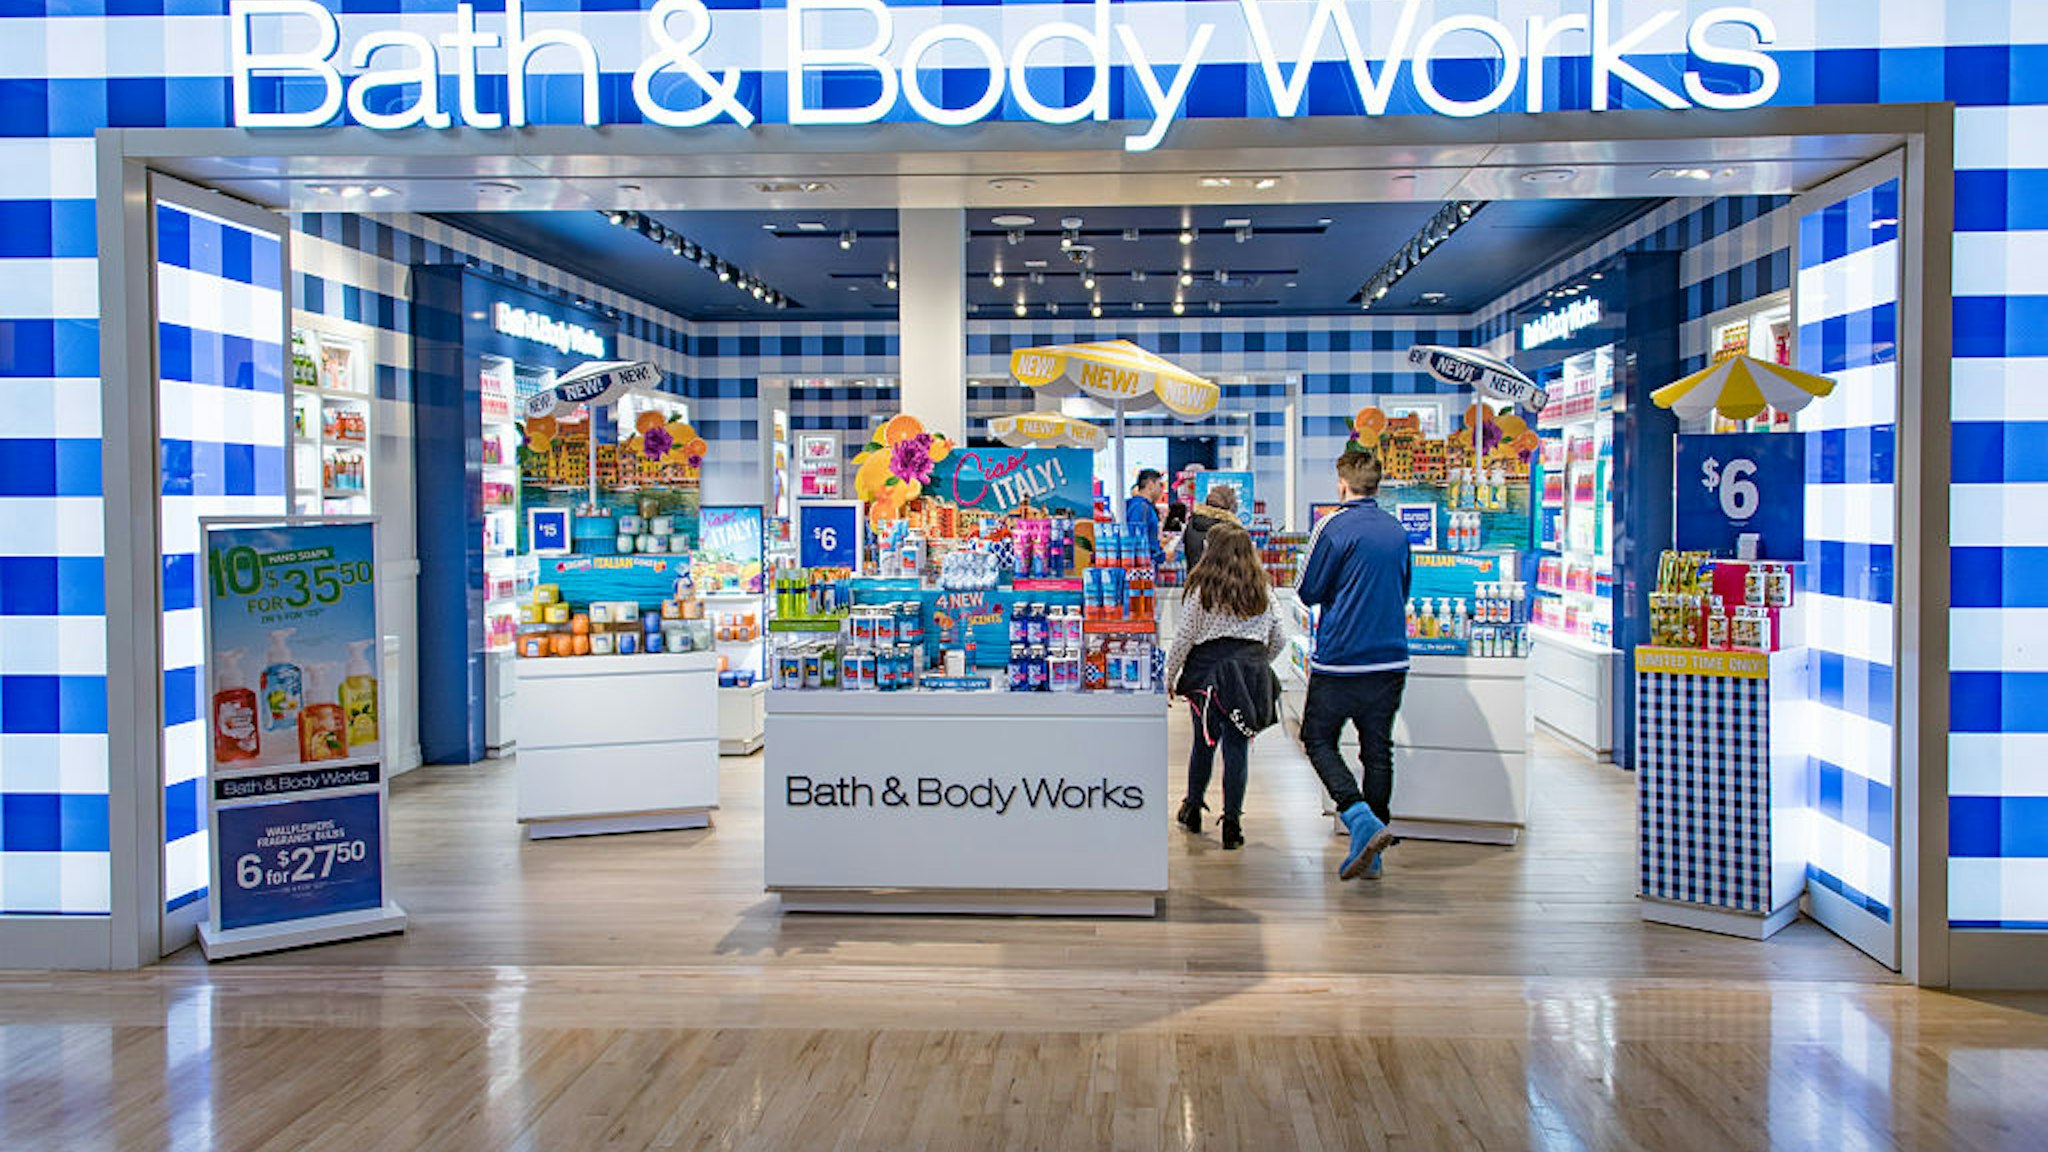 Bath & Body Works store entrance in mall: Store known for selling body products